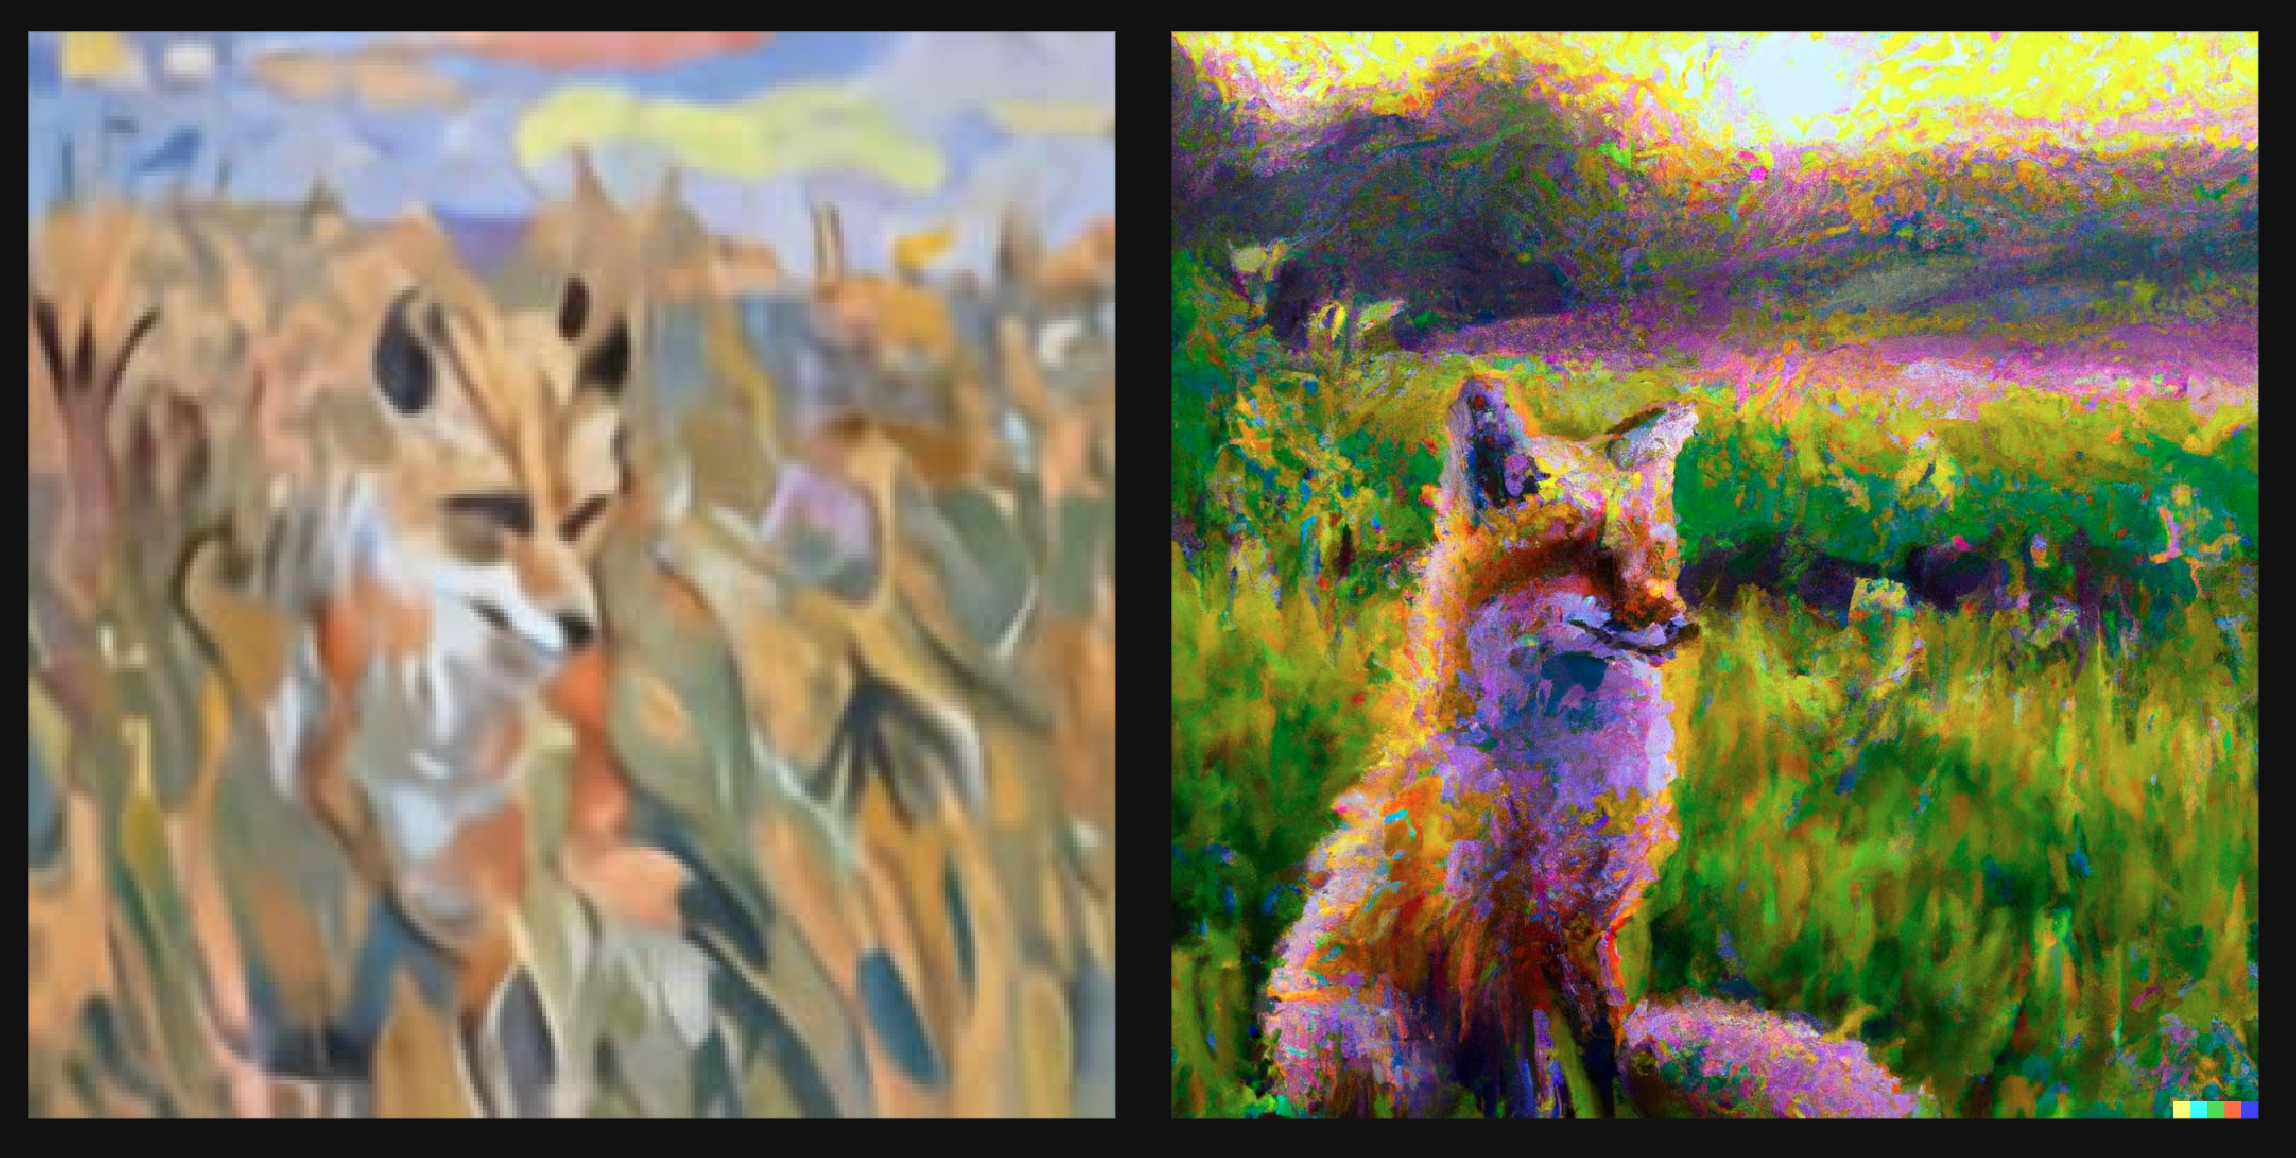 Image of a fox created by DALL-E1 compared to an image of a fox created by DALL-E2